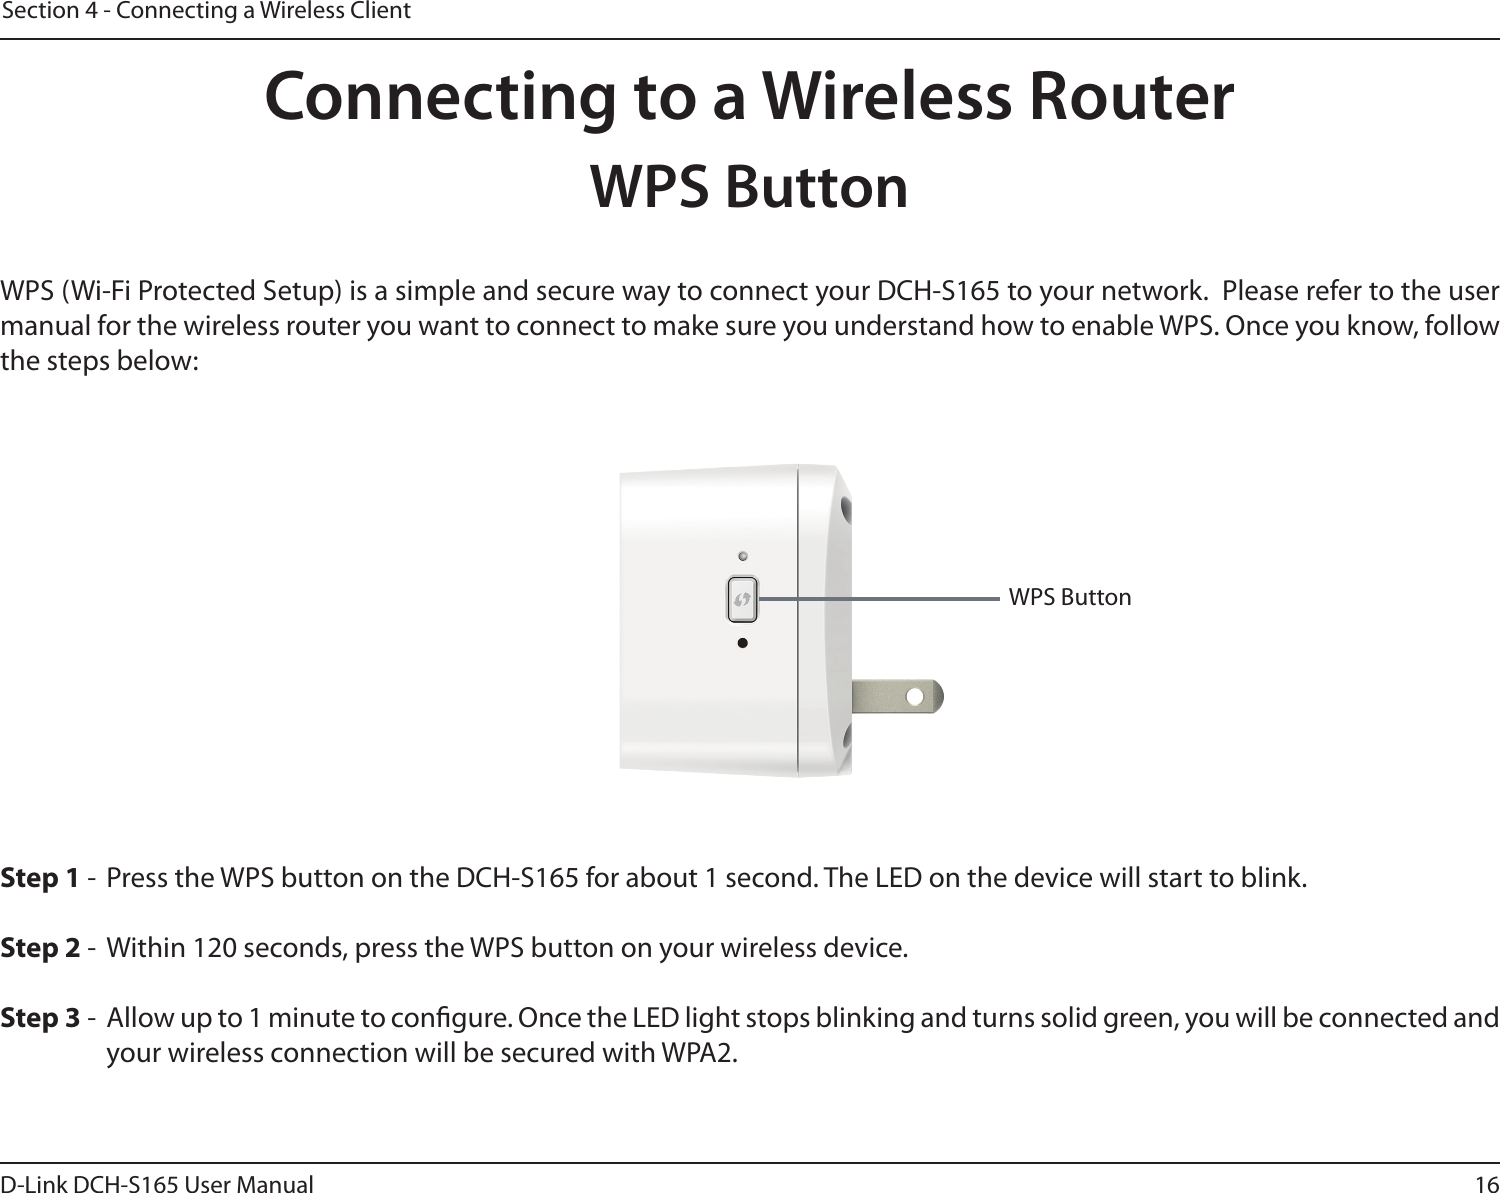 16D-Link DCH-S165 User ManualSection 4 - Connecting a Wireless ClientConnecting to a Wireless RouterWPS ButtonWPS (Wi-Fi Protected Setup) is a simple and secure way to connect your DCH-S165 to your network.  Please refer to the user manual for the wireless router you want to connect to make sure you understand how to enable WPS. Once you know, follow the steps below:Step 1 -  Press the WPS button on the DCH-S165 for about 1 second. The LED on the device will start to blink.Step 2 -  Within 120 seconds, press the WPS button on your wireless device.Step 3 -  Allow up to 1 minute to congure. Once the LED light stops blinking and turns solid green, you will be connected and your wireless connection will be secured with WPA2.WPS Button